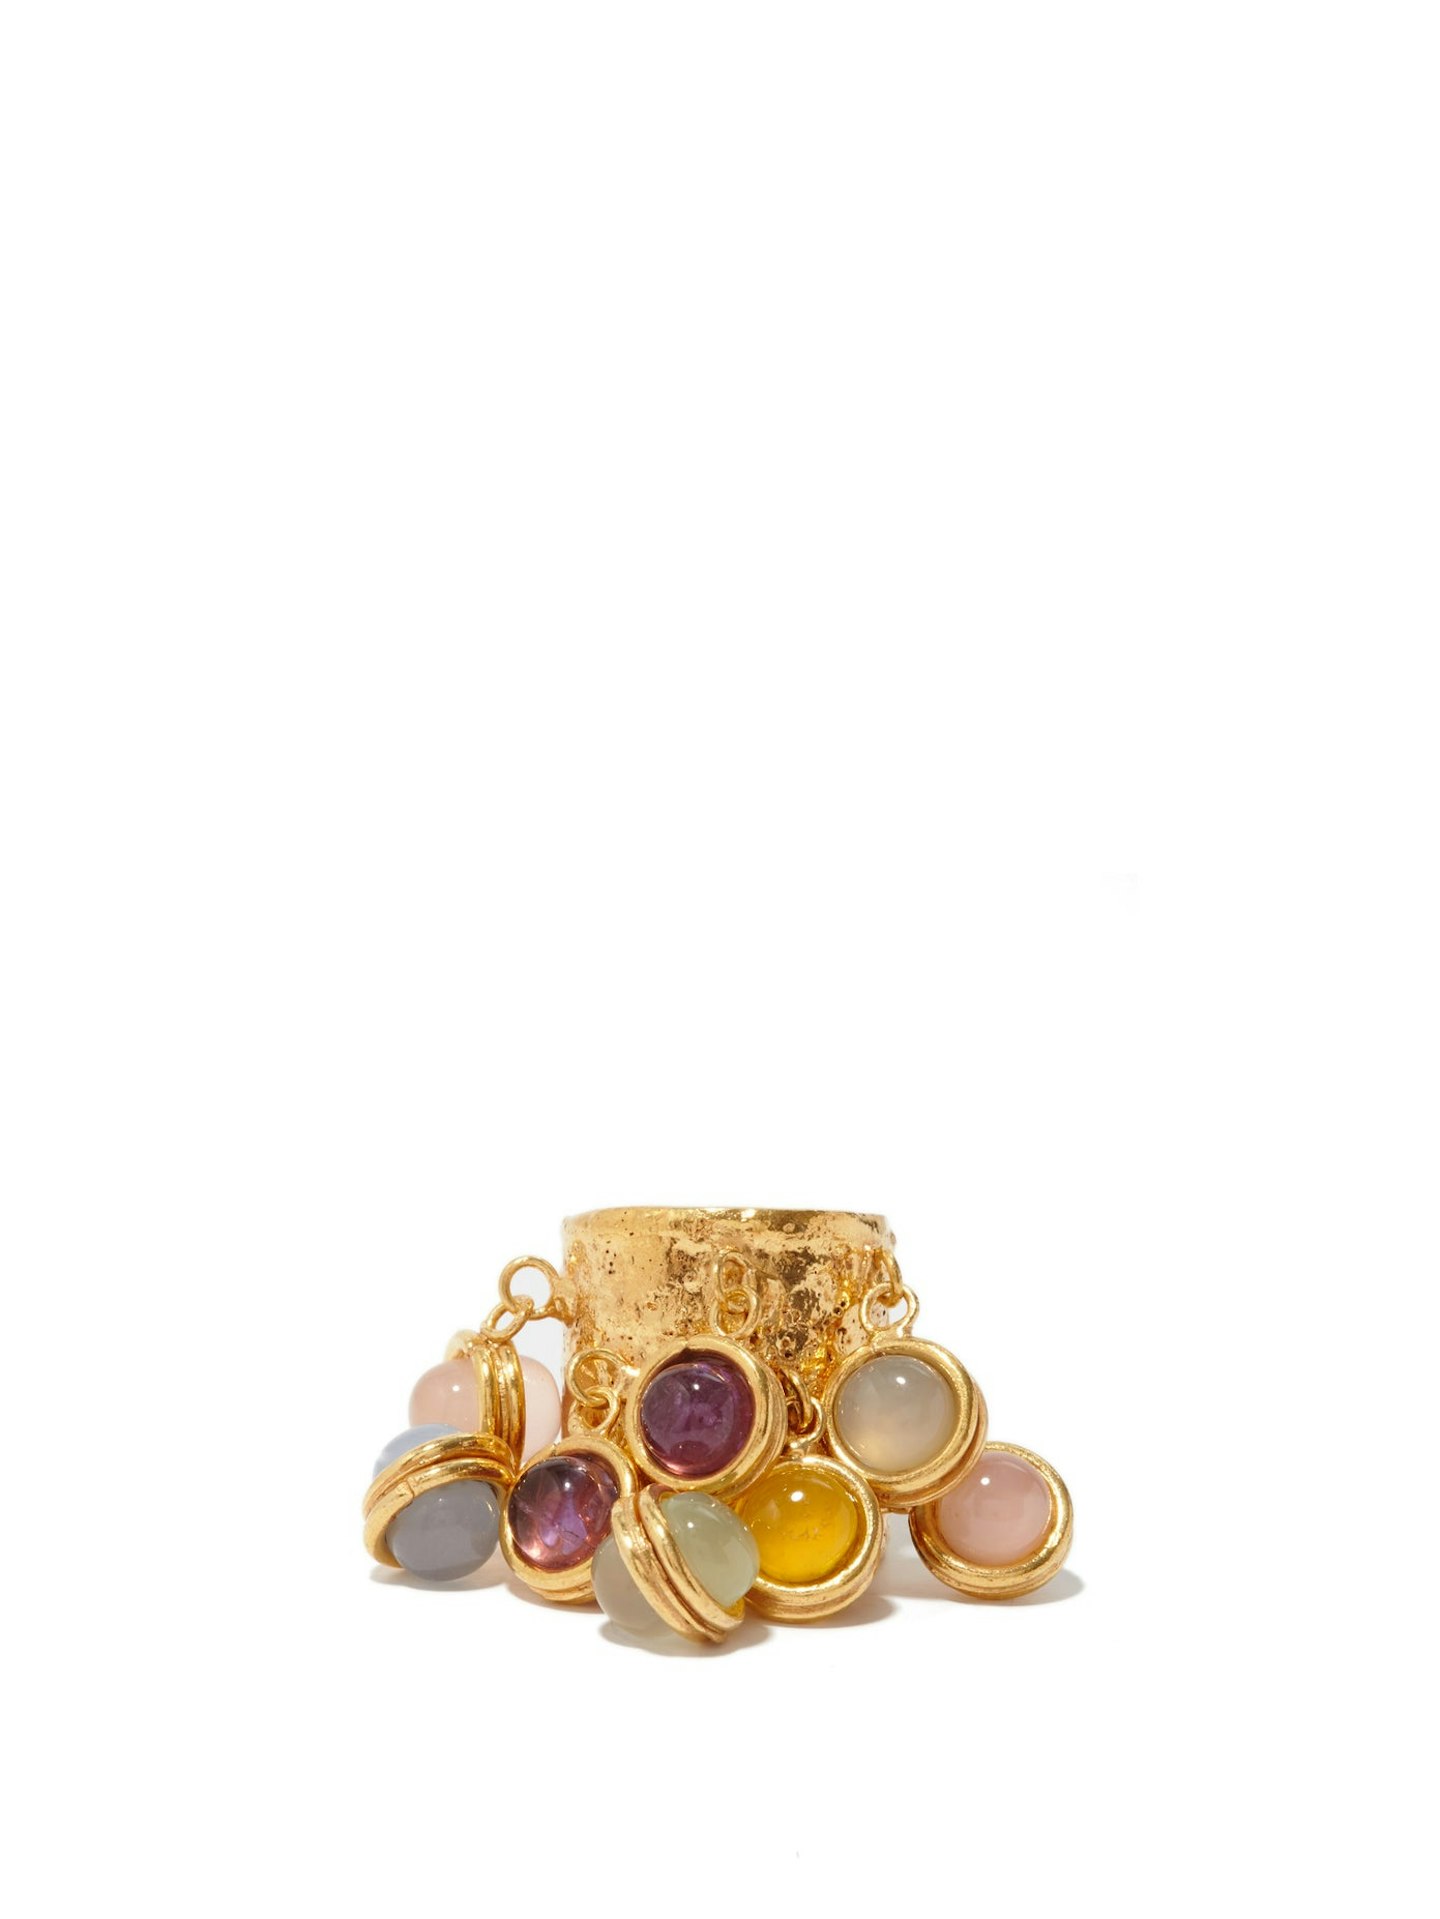 Sylvia Toledano, Summer Candy gold-plated ring, £120